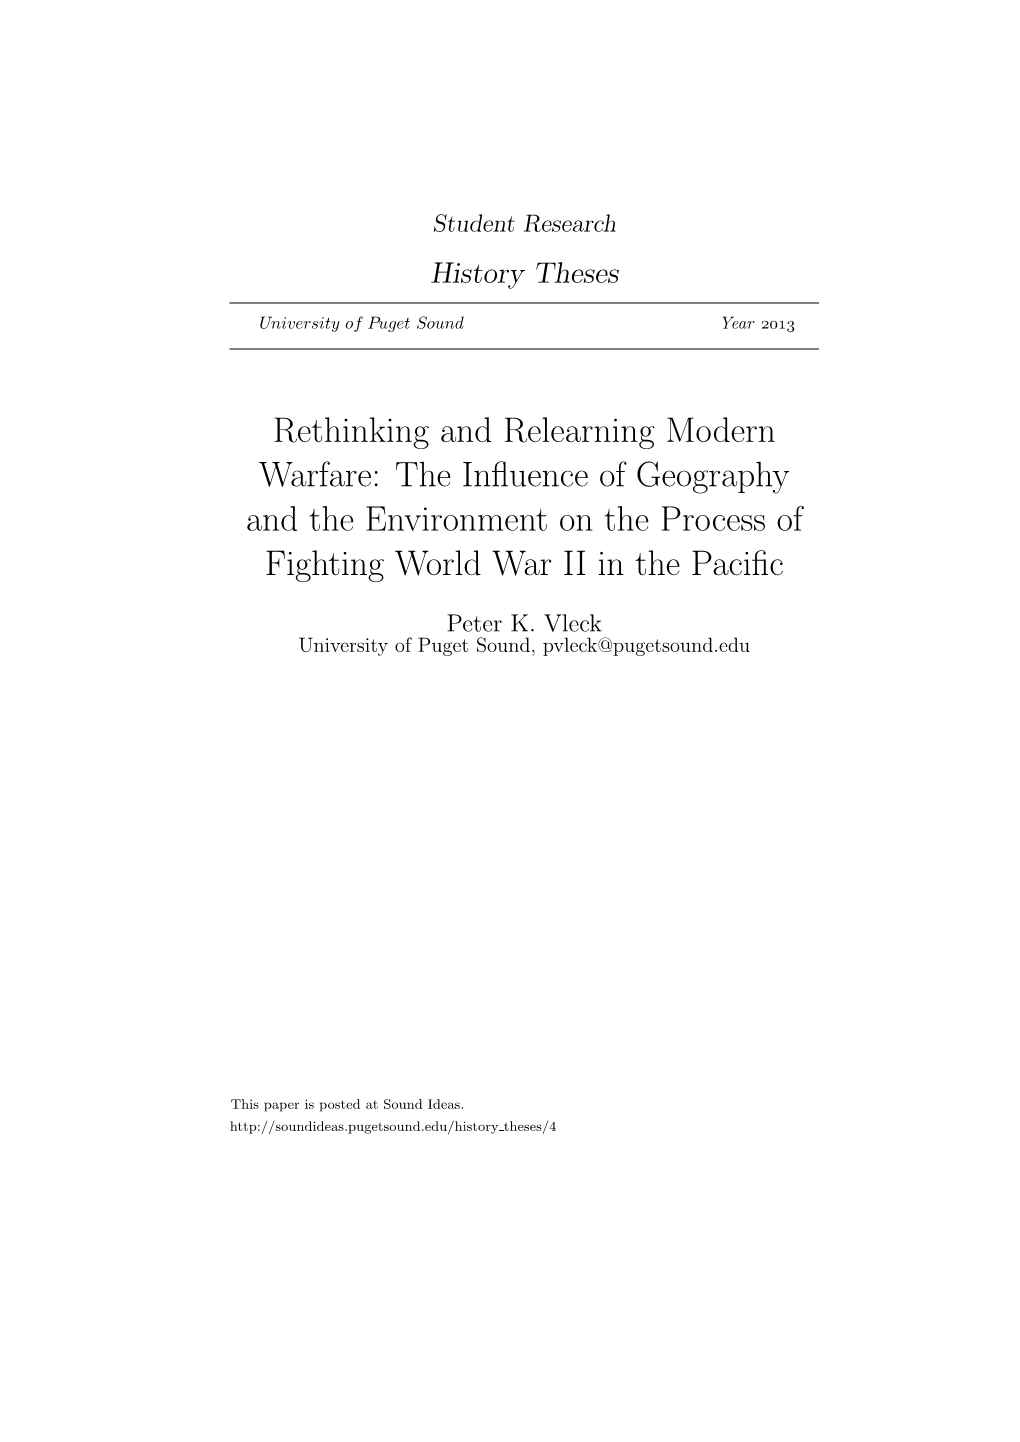 Rethinking and Relearning Modern Warfare: the Inﬂuence of Geography and the Environment on the Process of Fighting World War II in the Paciﬁc